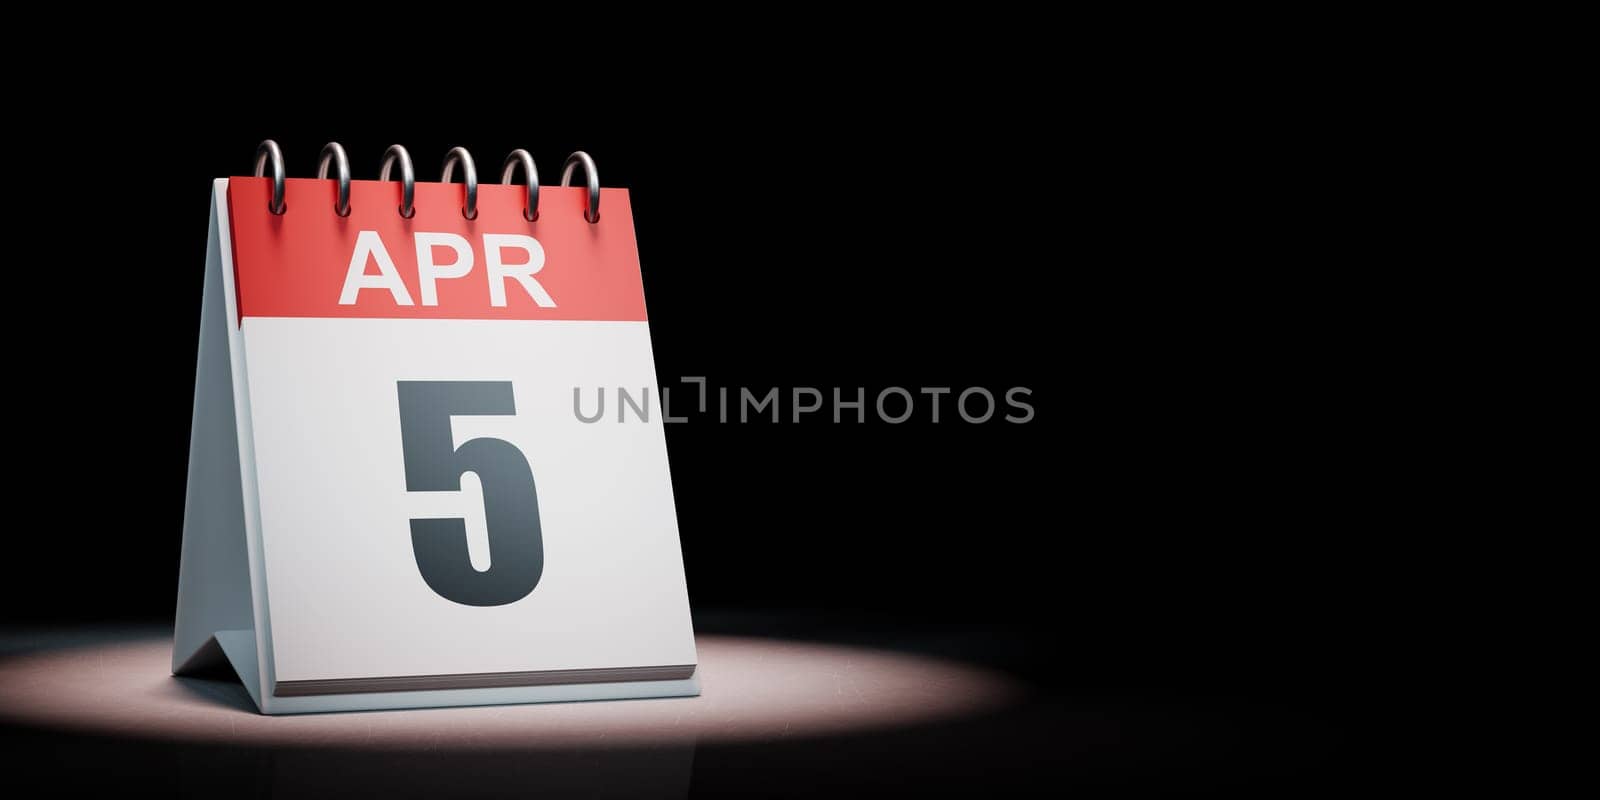 Red and White April 5 Desk Calendar Spotlighted on Black Background with Copy Space 3D Illustration